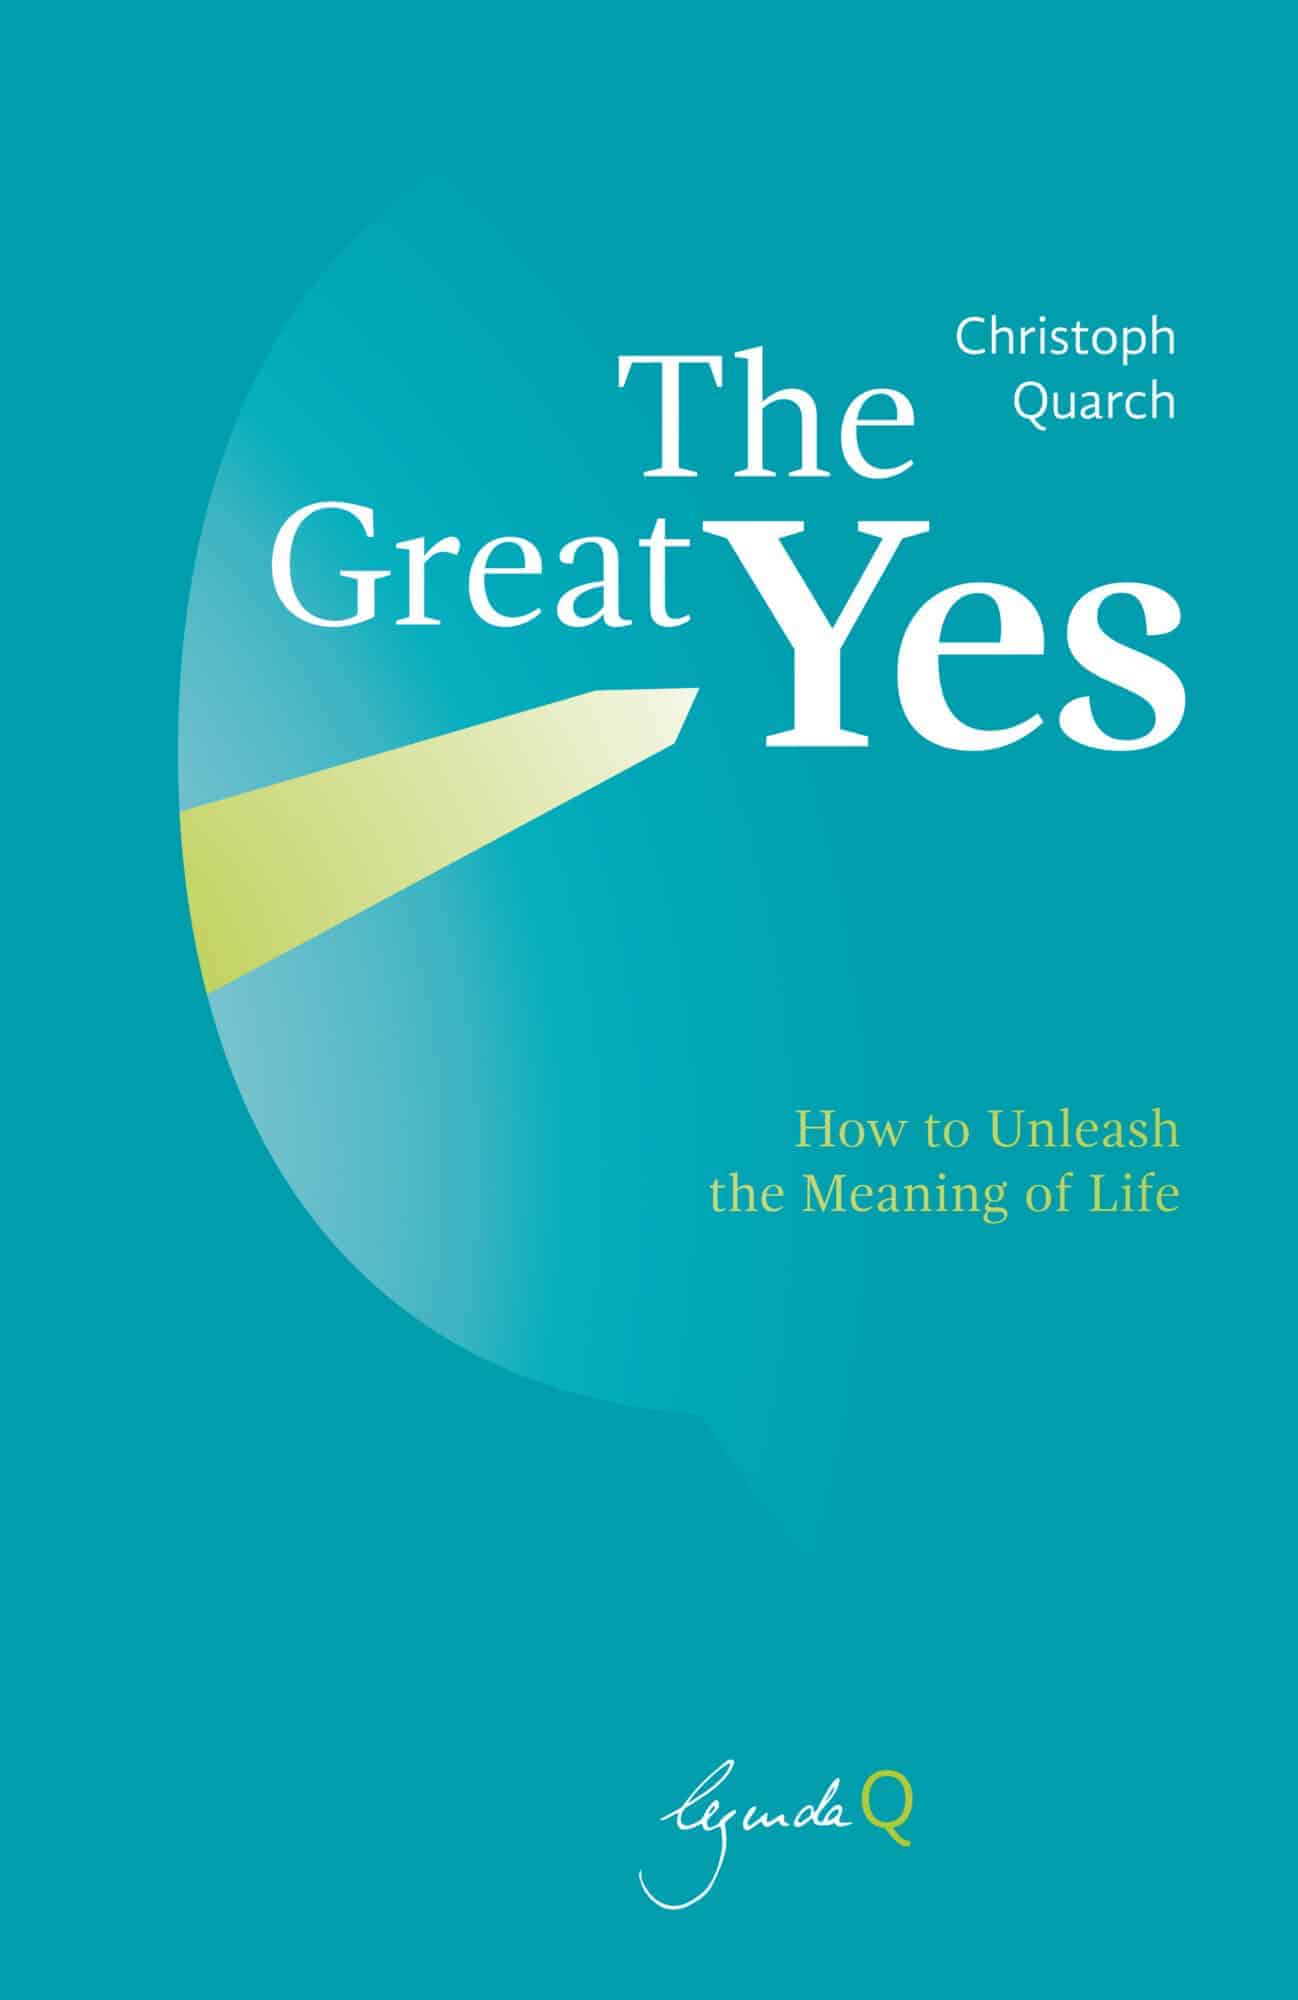 The Great Yes - Christoph Quarch